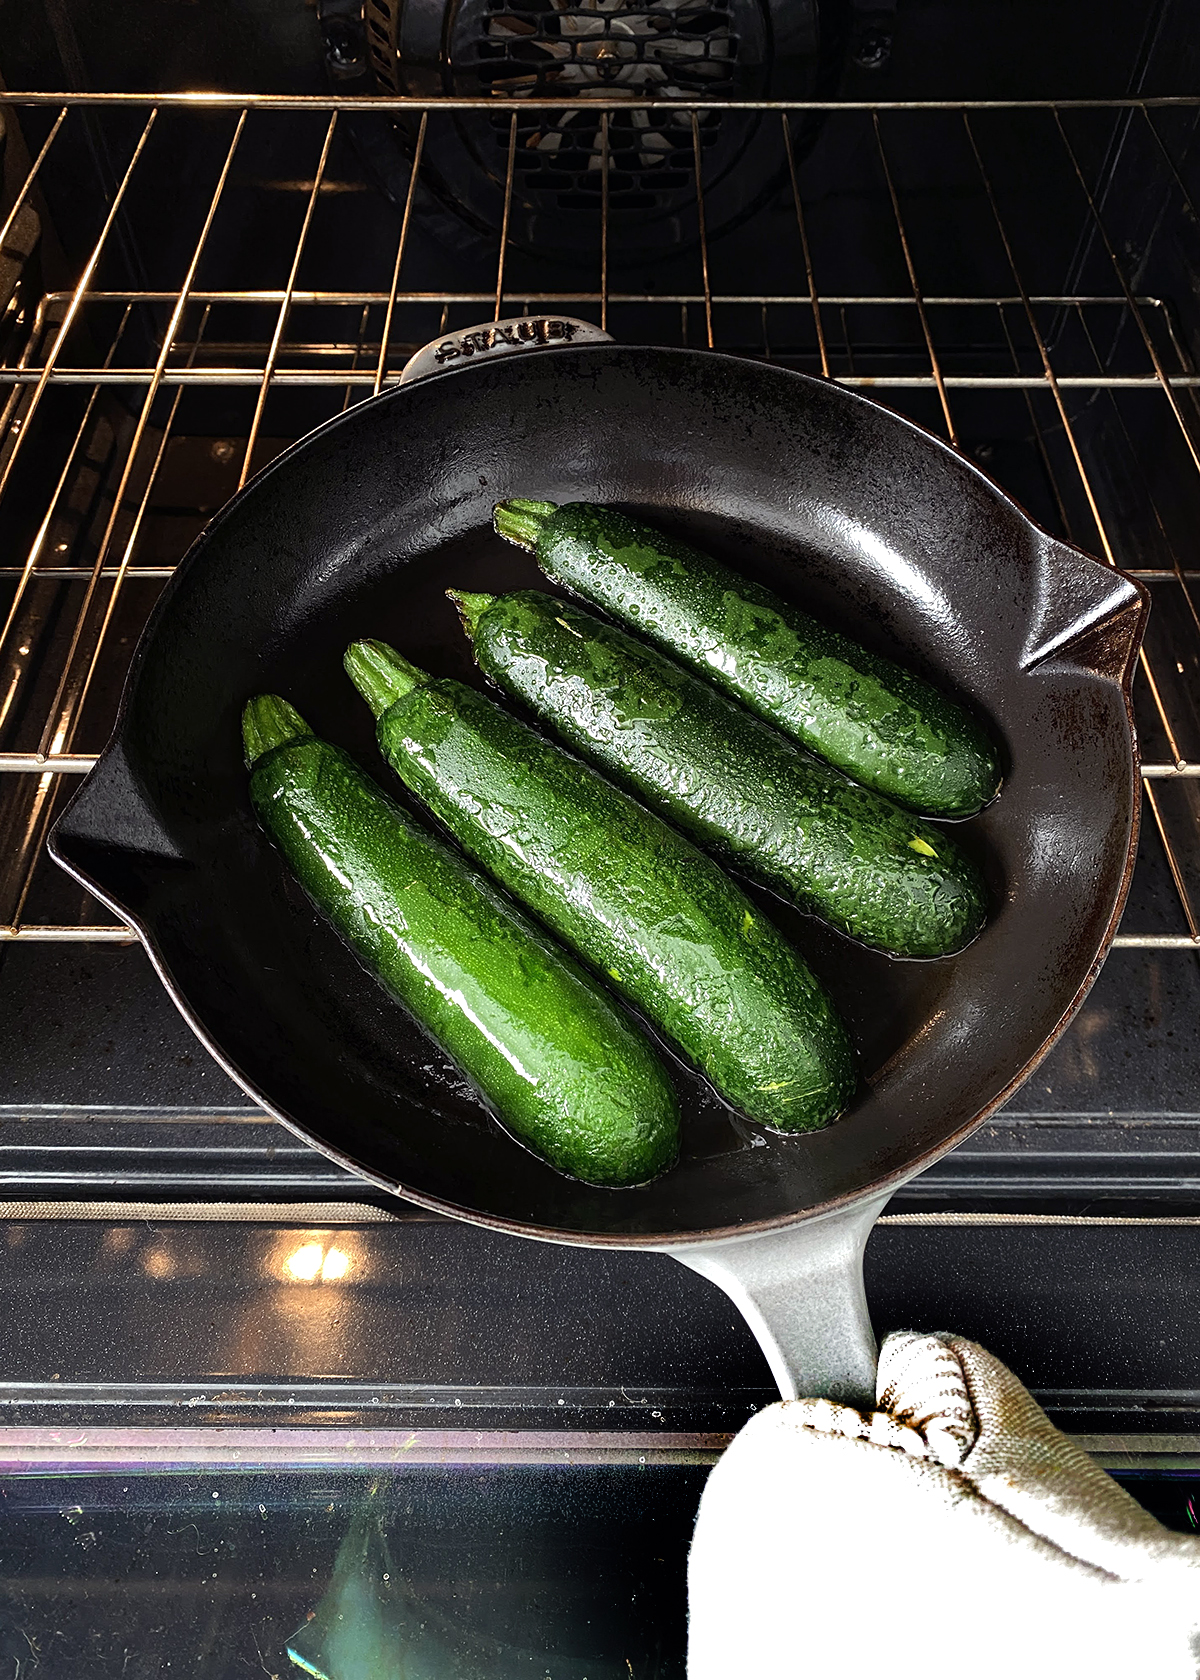 oven roasted zucchini sliced lengthwise, placed cut-side down in cast iron skillet going into oven